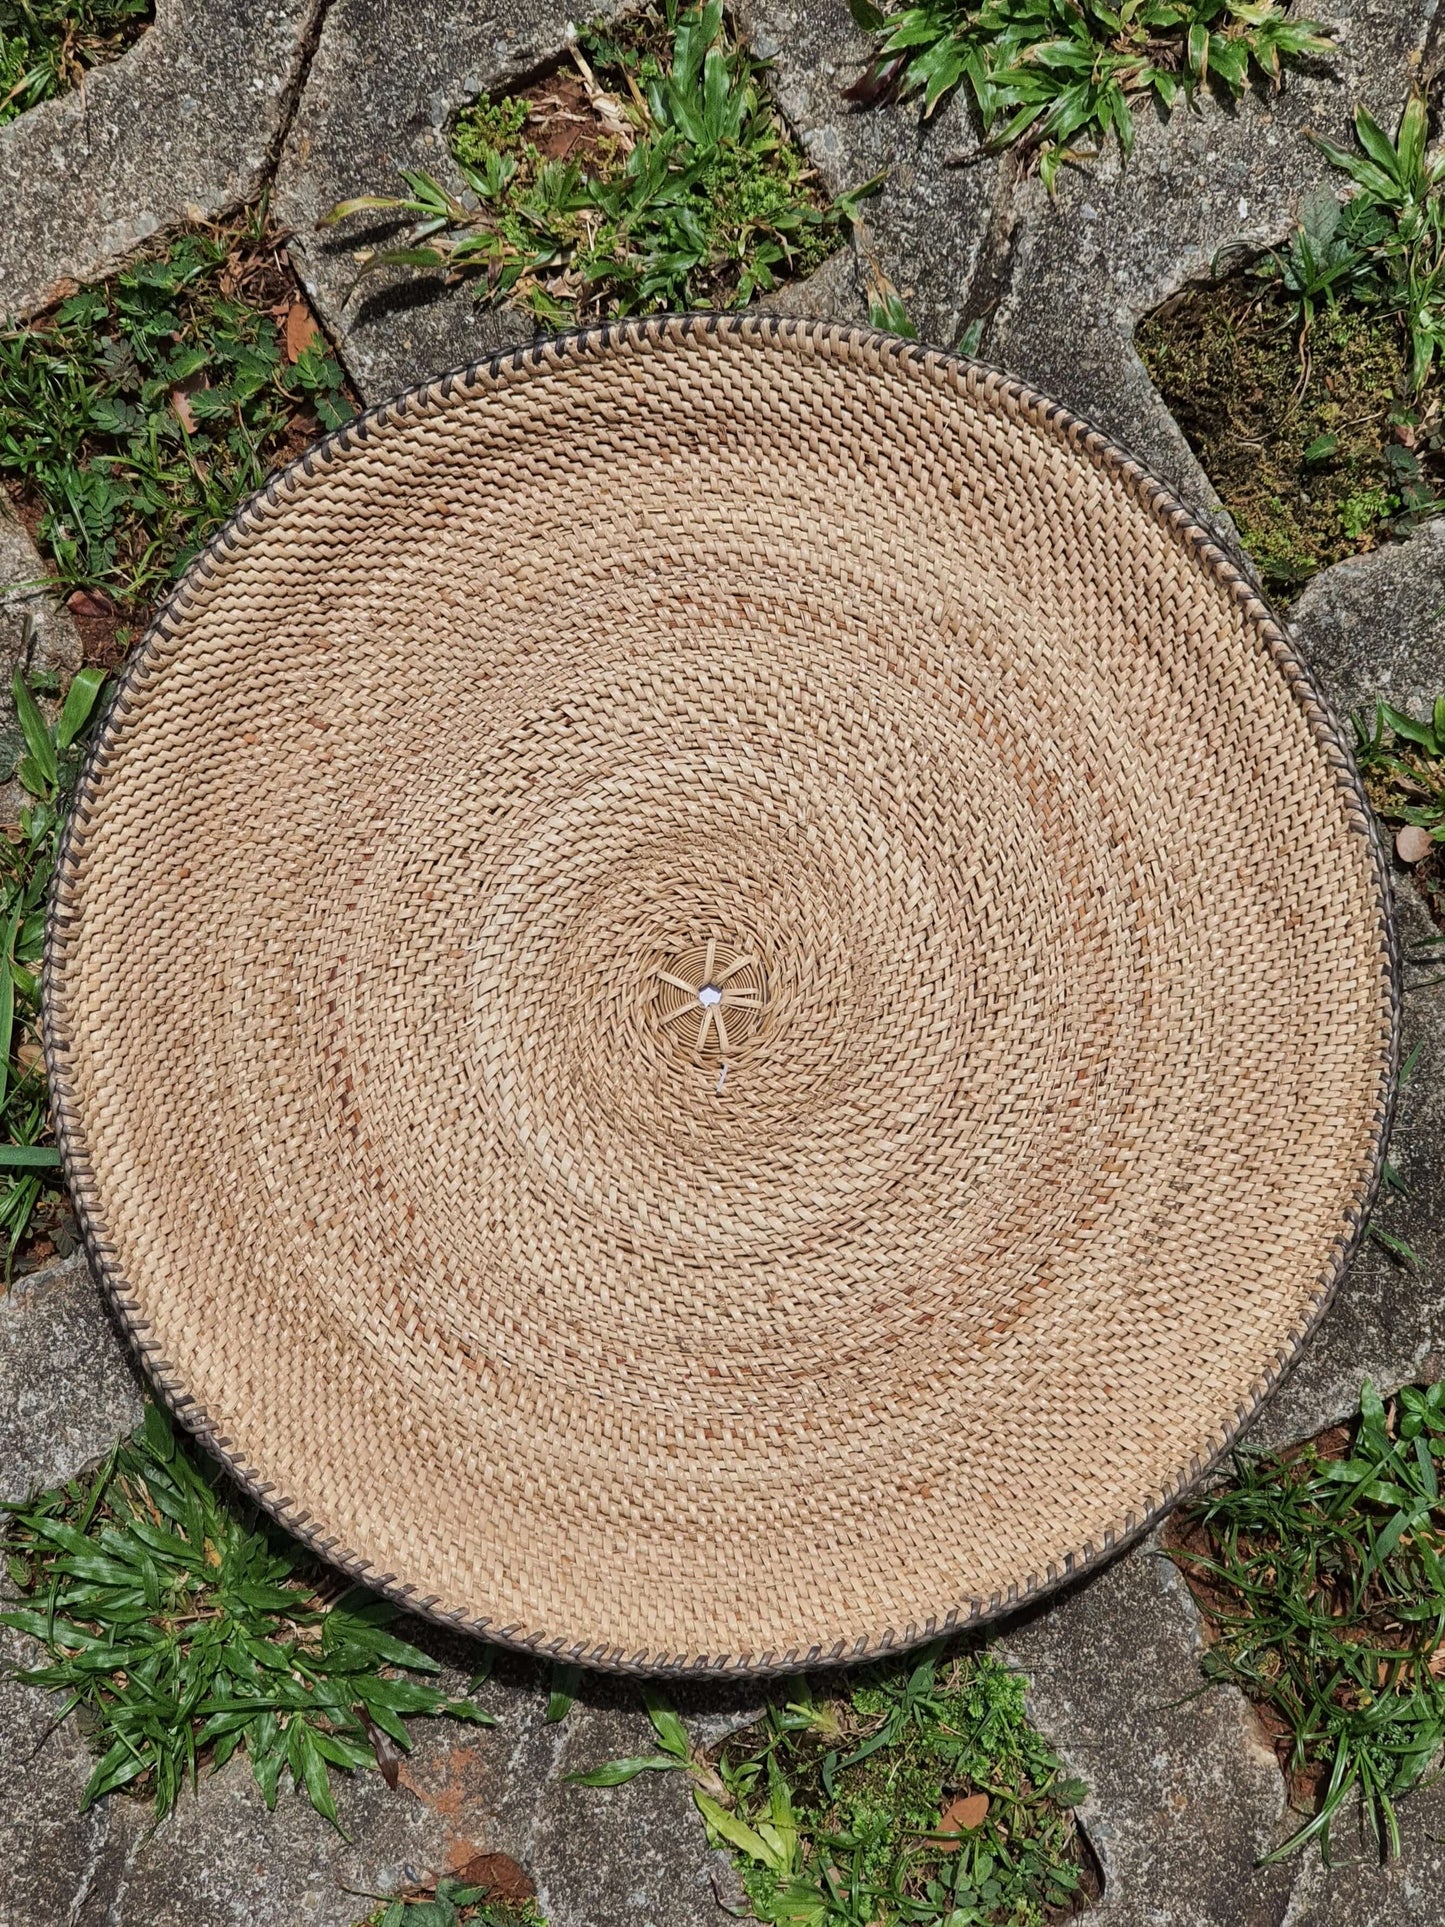 Rattan Coilings: Round